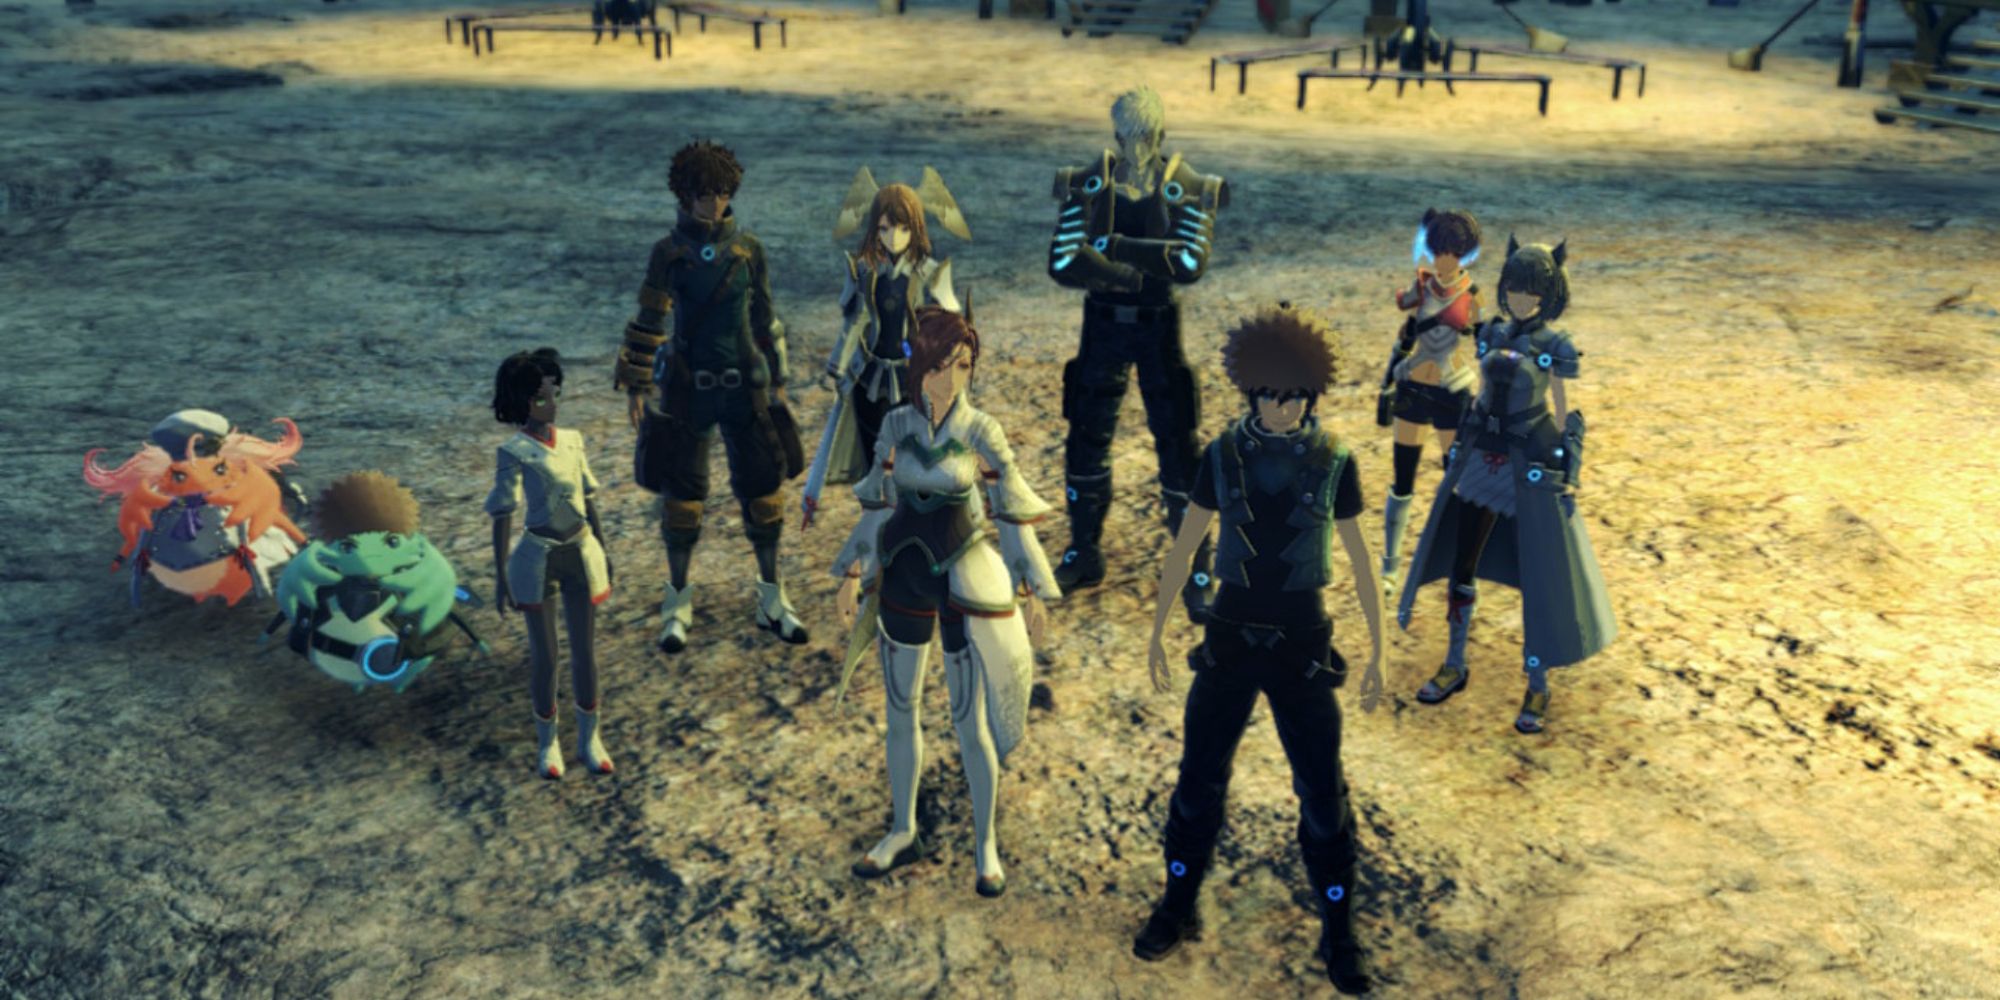 The main cast working with Alexandria from Colony Iota in Xenoblade Chronicles 3